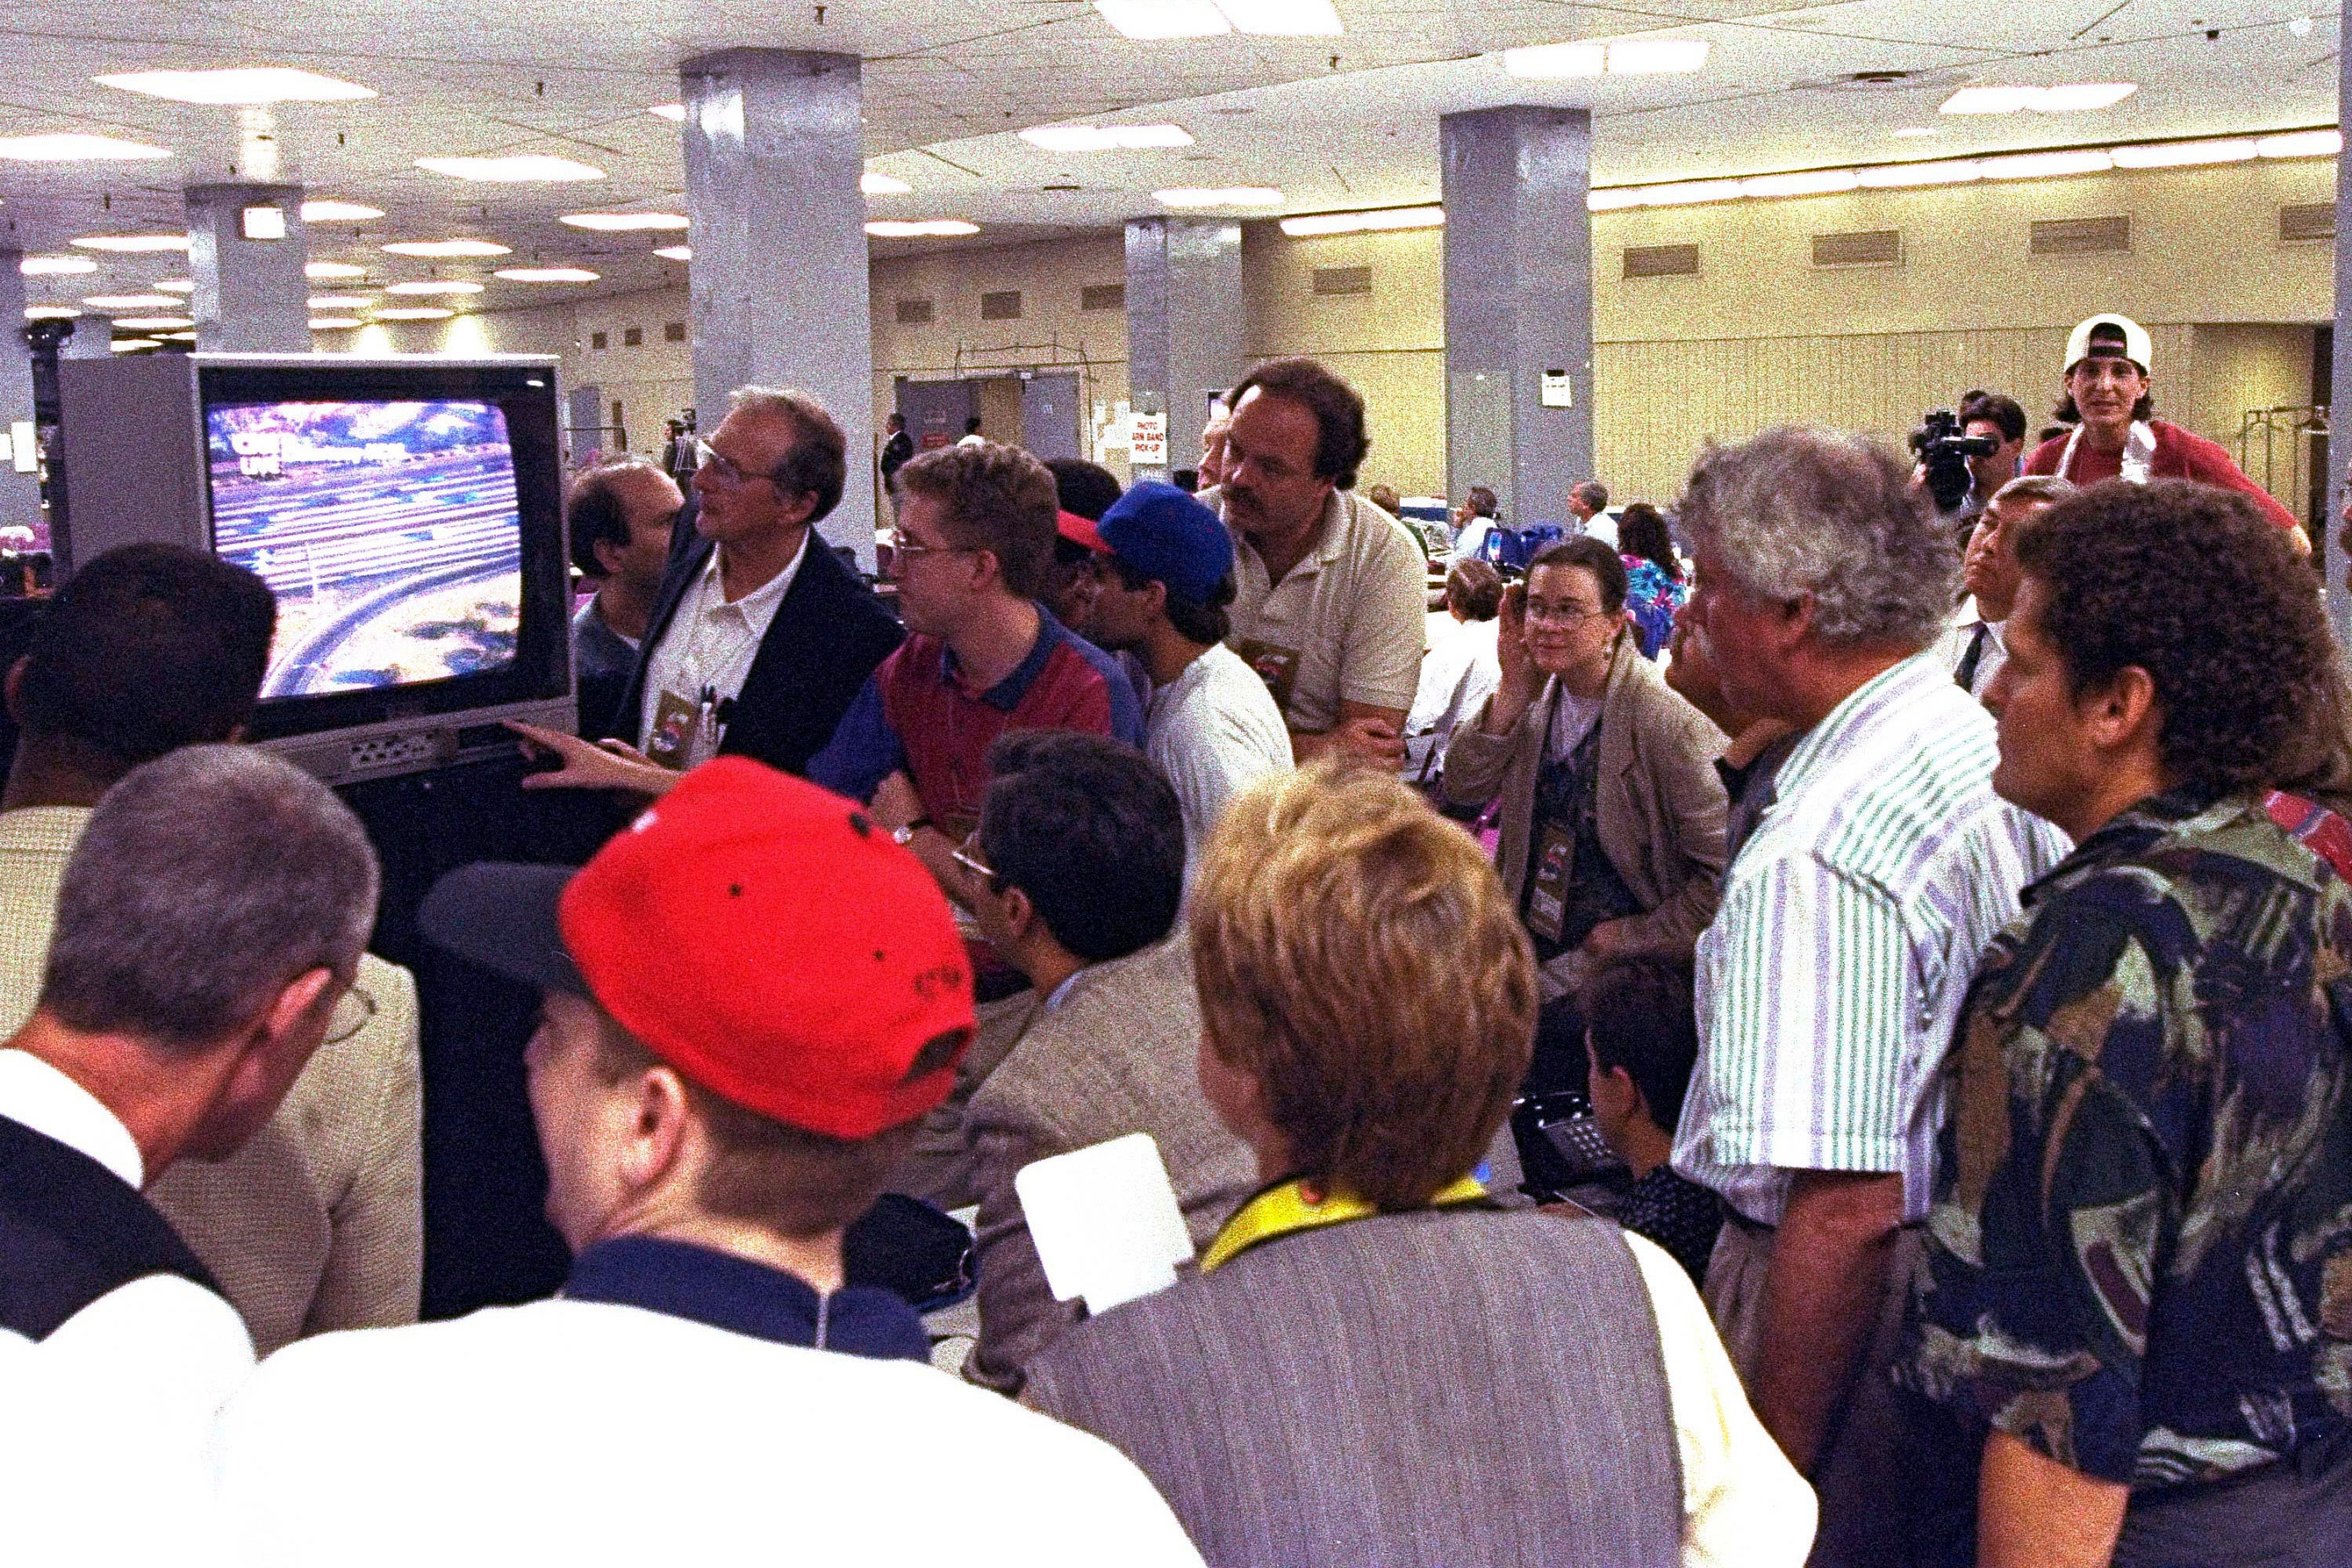 Members of the news media watch live television coverage of the O.J. Simpson slow speed chase on Los Angeles freeways during Game 5 of the NBA finals in New York City